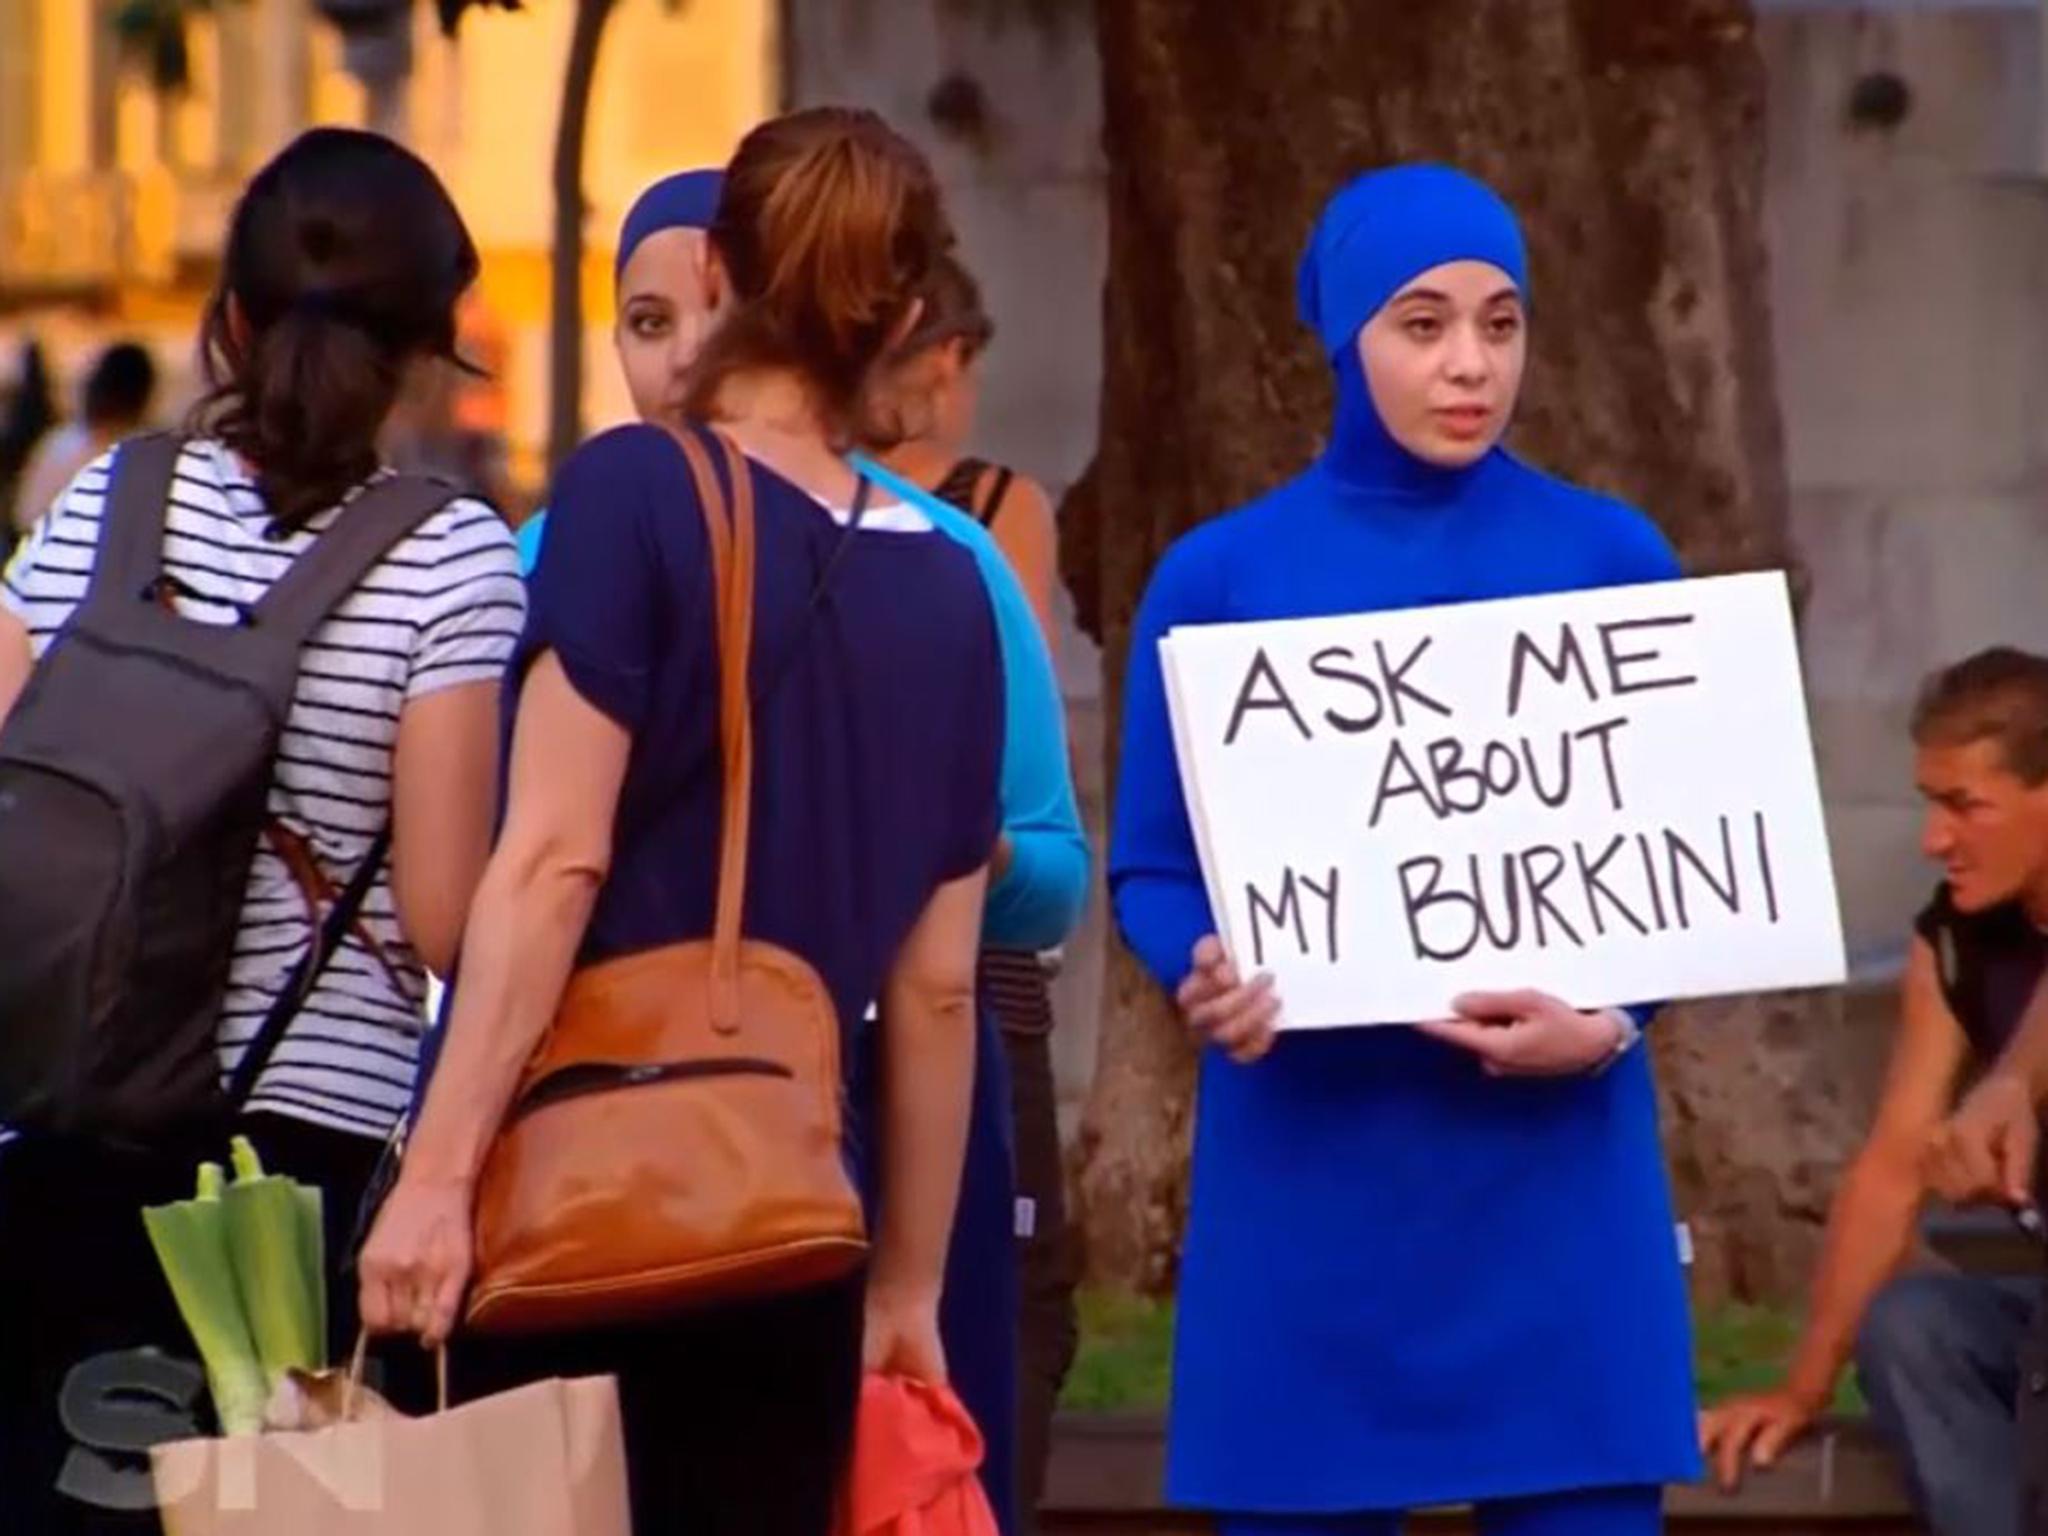 Zeynad Alshelh wanted to challenge preconceptions about women who wear the burkini